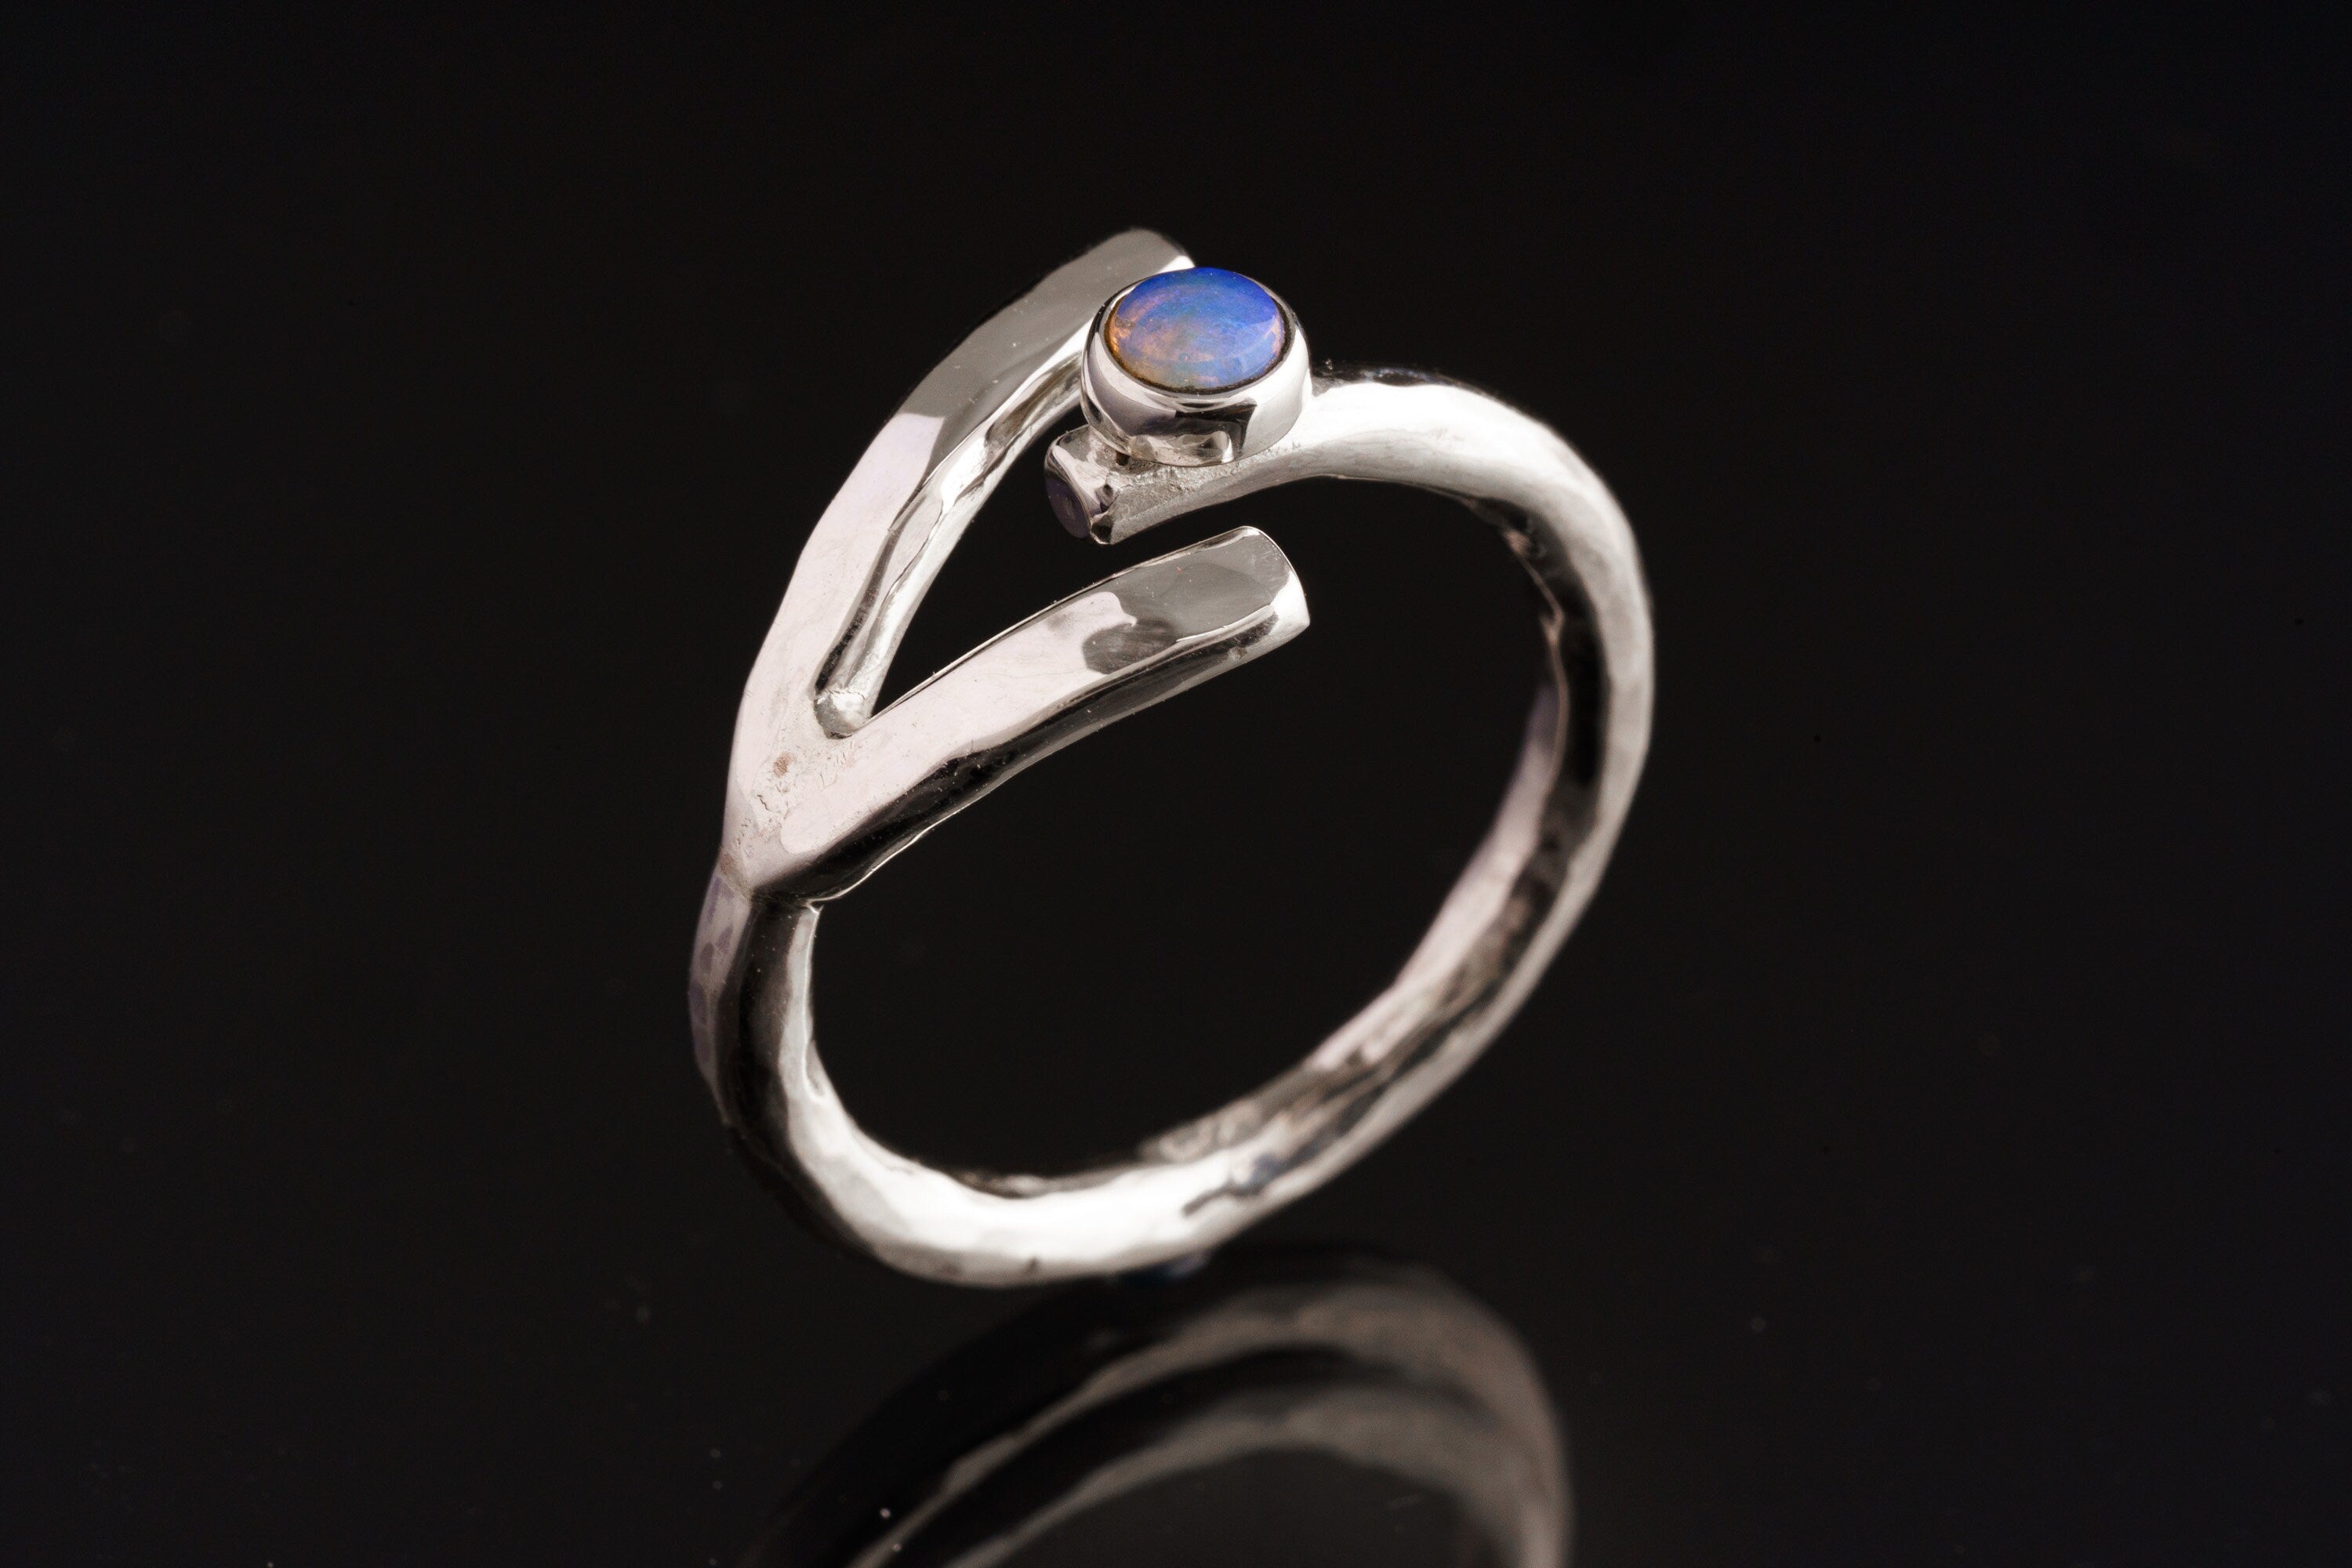 Dowsing Radiance: Rainbow Opal - Polished finish - Adjustable Sterling Silver Ring - Size 7-10 US